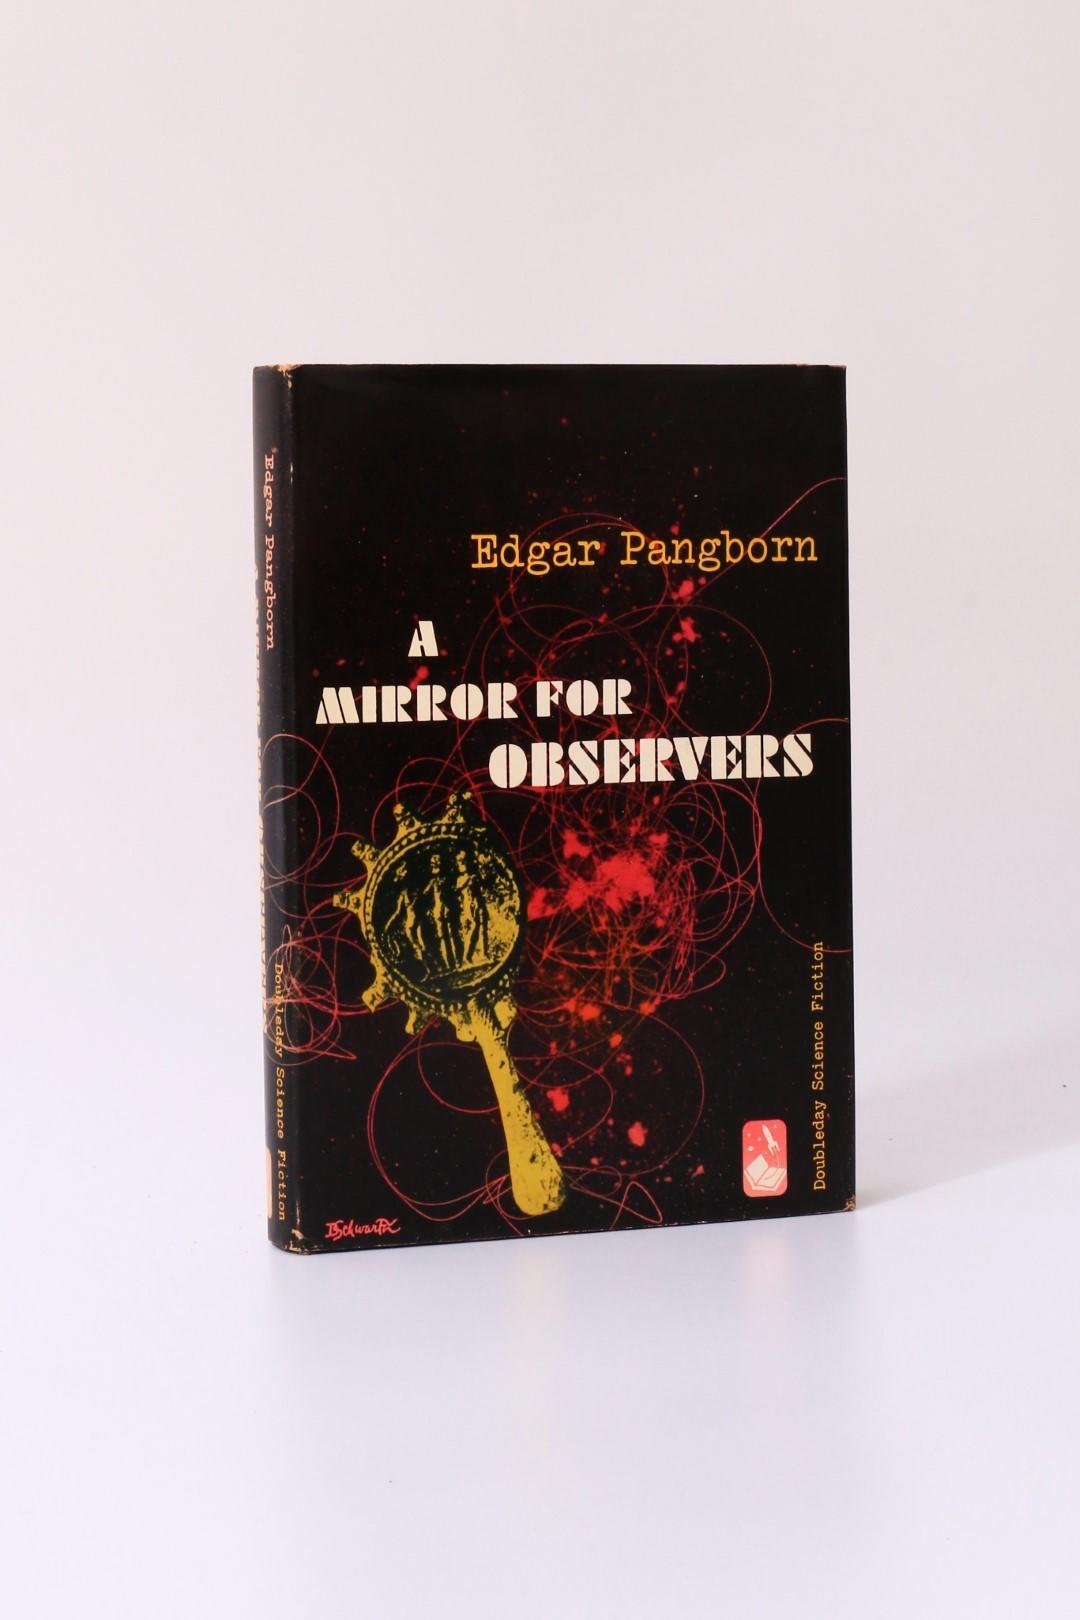 Edgar Pangborn - A Mirror for Observers - Doubleday, 1954, First Edition.